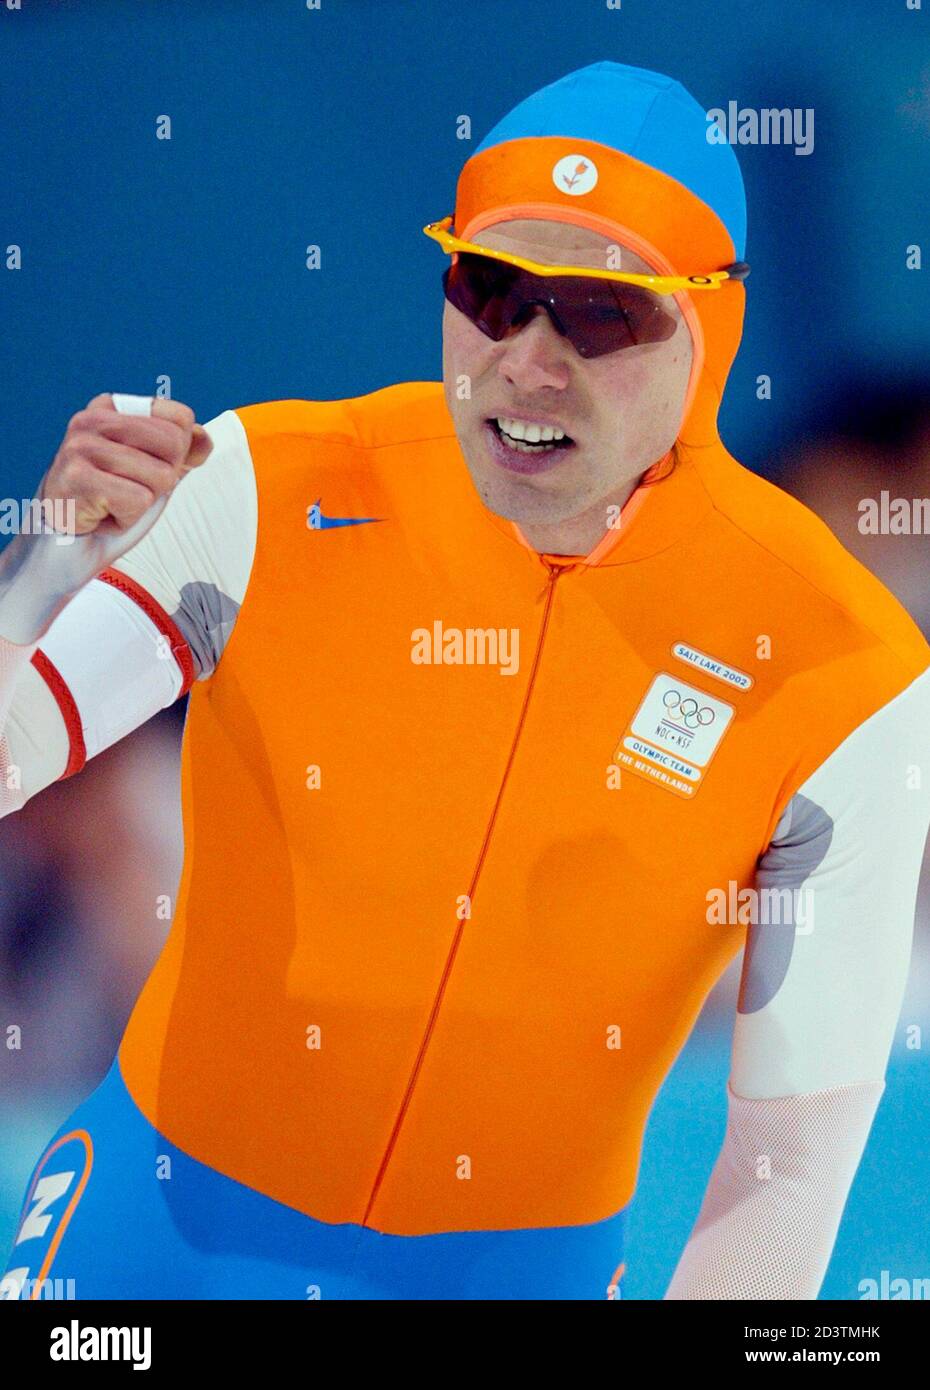 Dutch speed skater Gerard van Velde makes a fist after finishing the first  race of the men's 500m competition at the Salt Lake 2002 Olympic Winter  Games, February 11, 2002. Van Velde